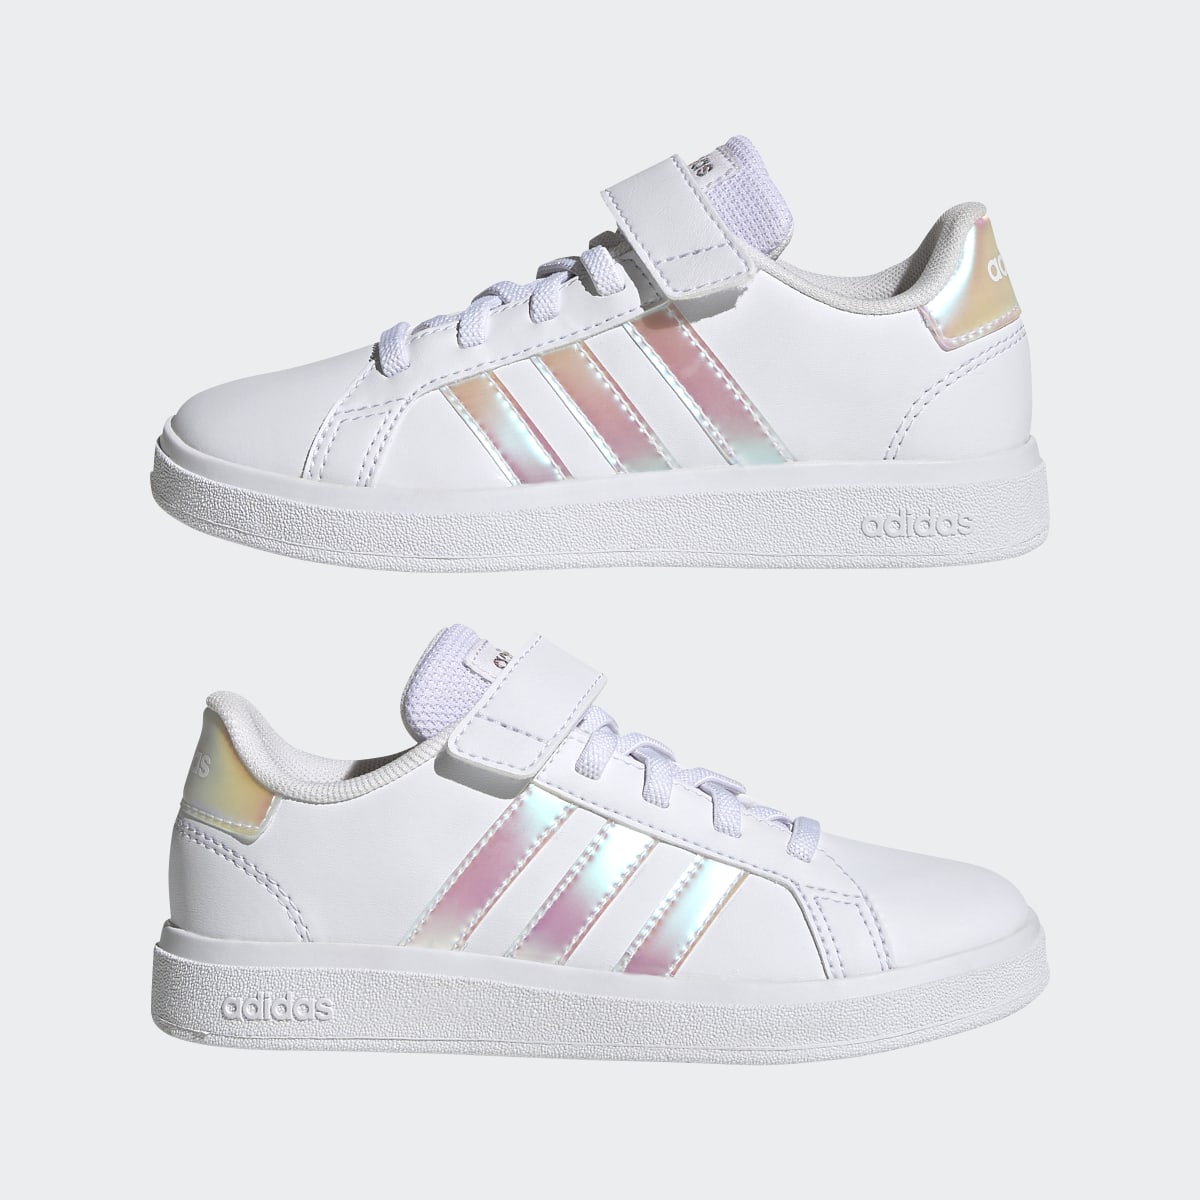 Adidas Grand Court Lifestyle Court Elastic Lace and Top Strap Shoes. 8